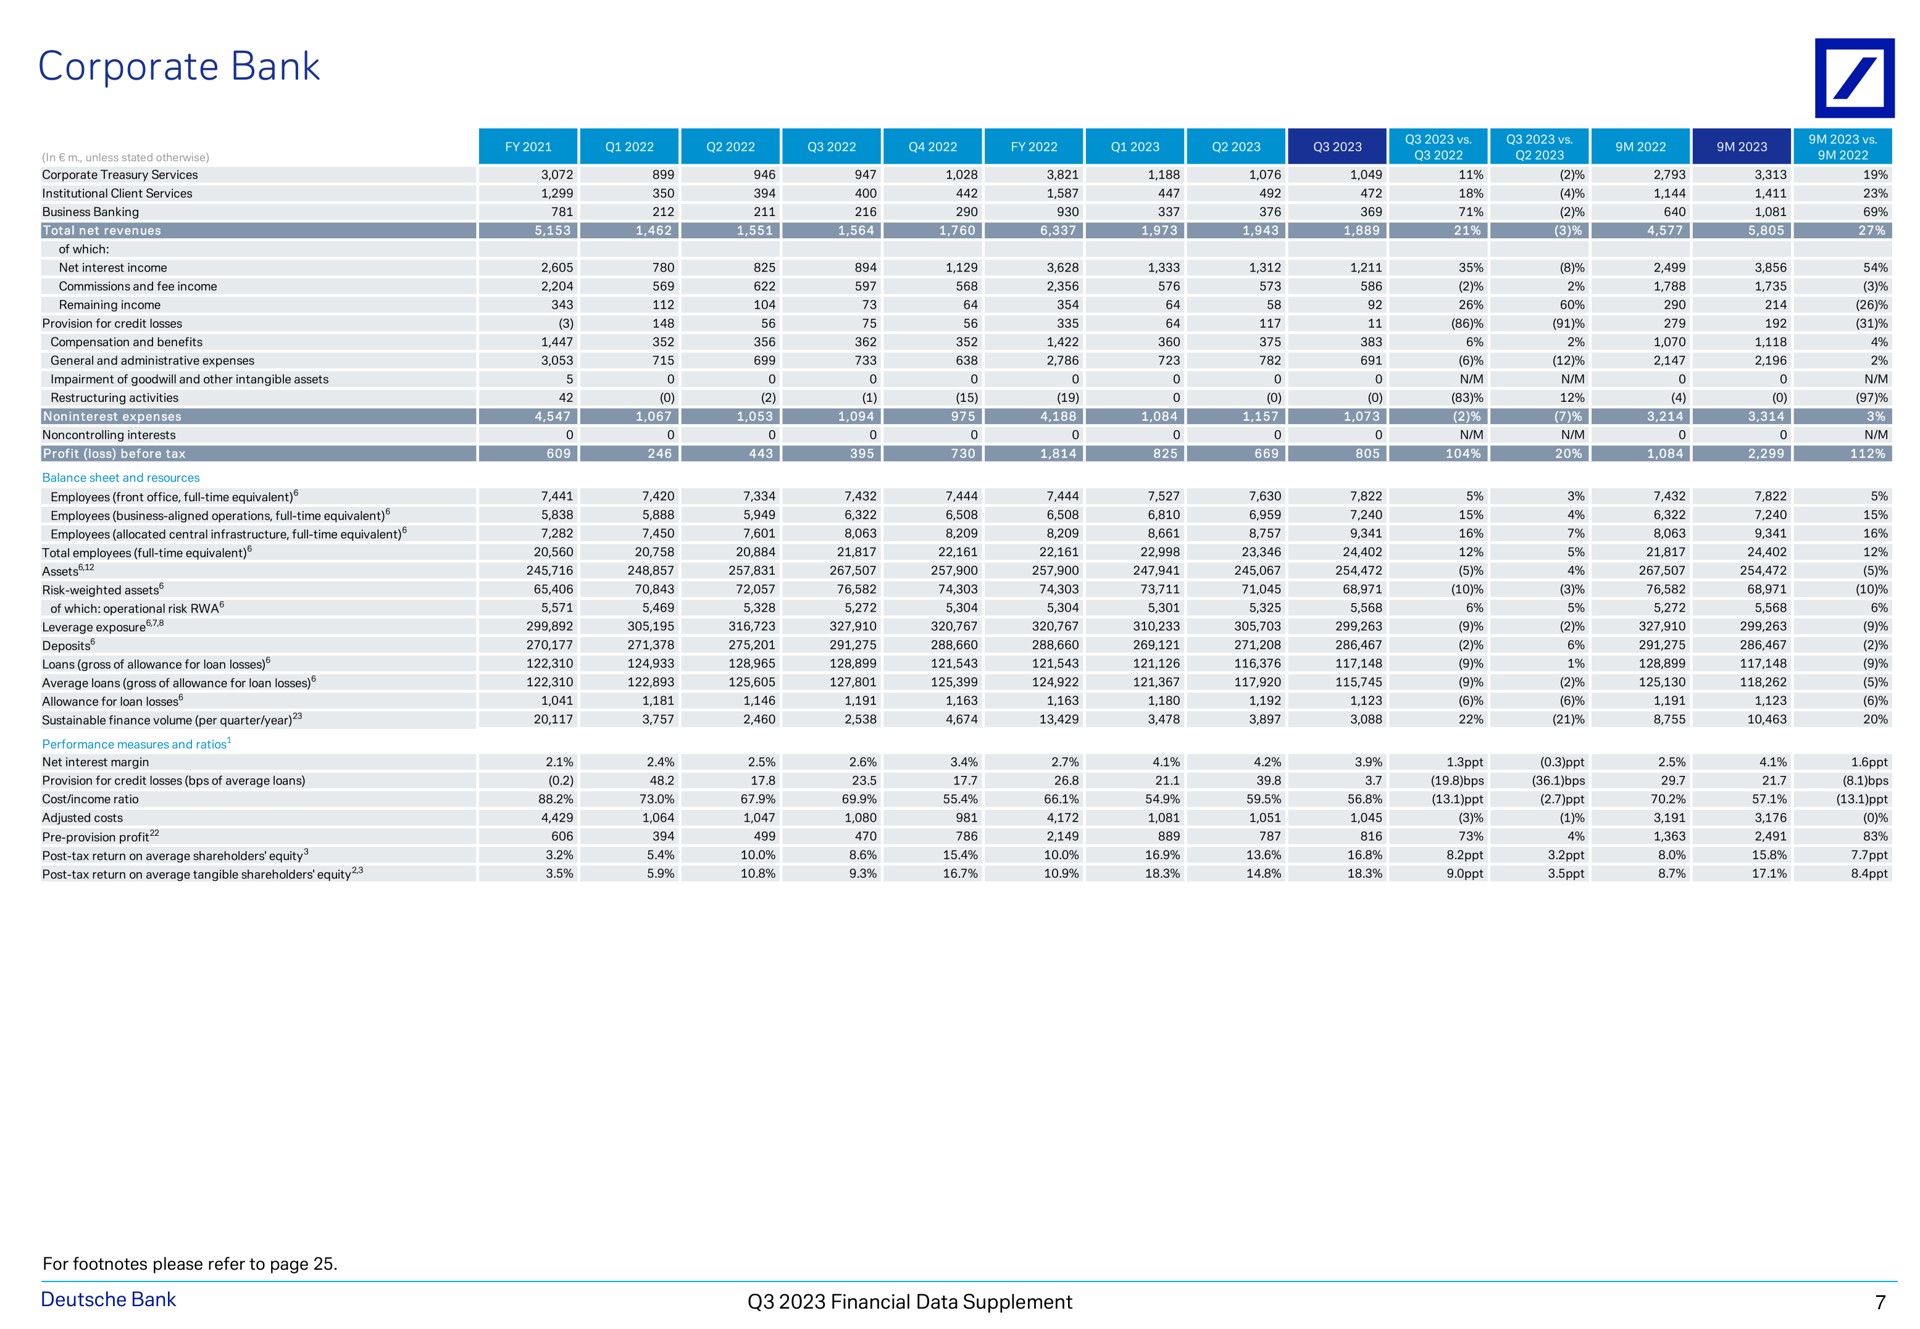 corporate bank a fee a for footnotes please refer to page financial data supplement | Deutsche Bank